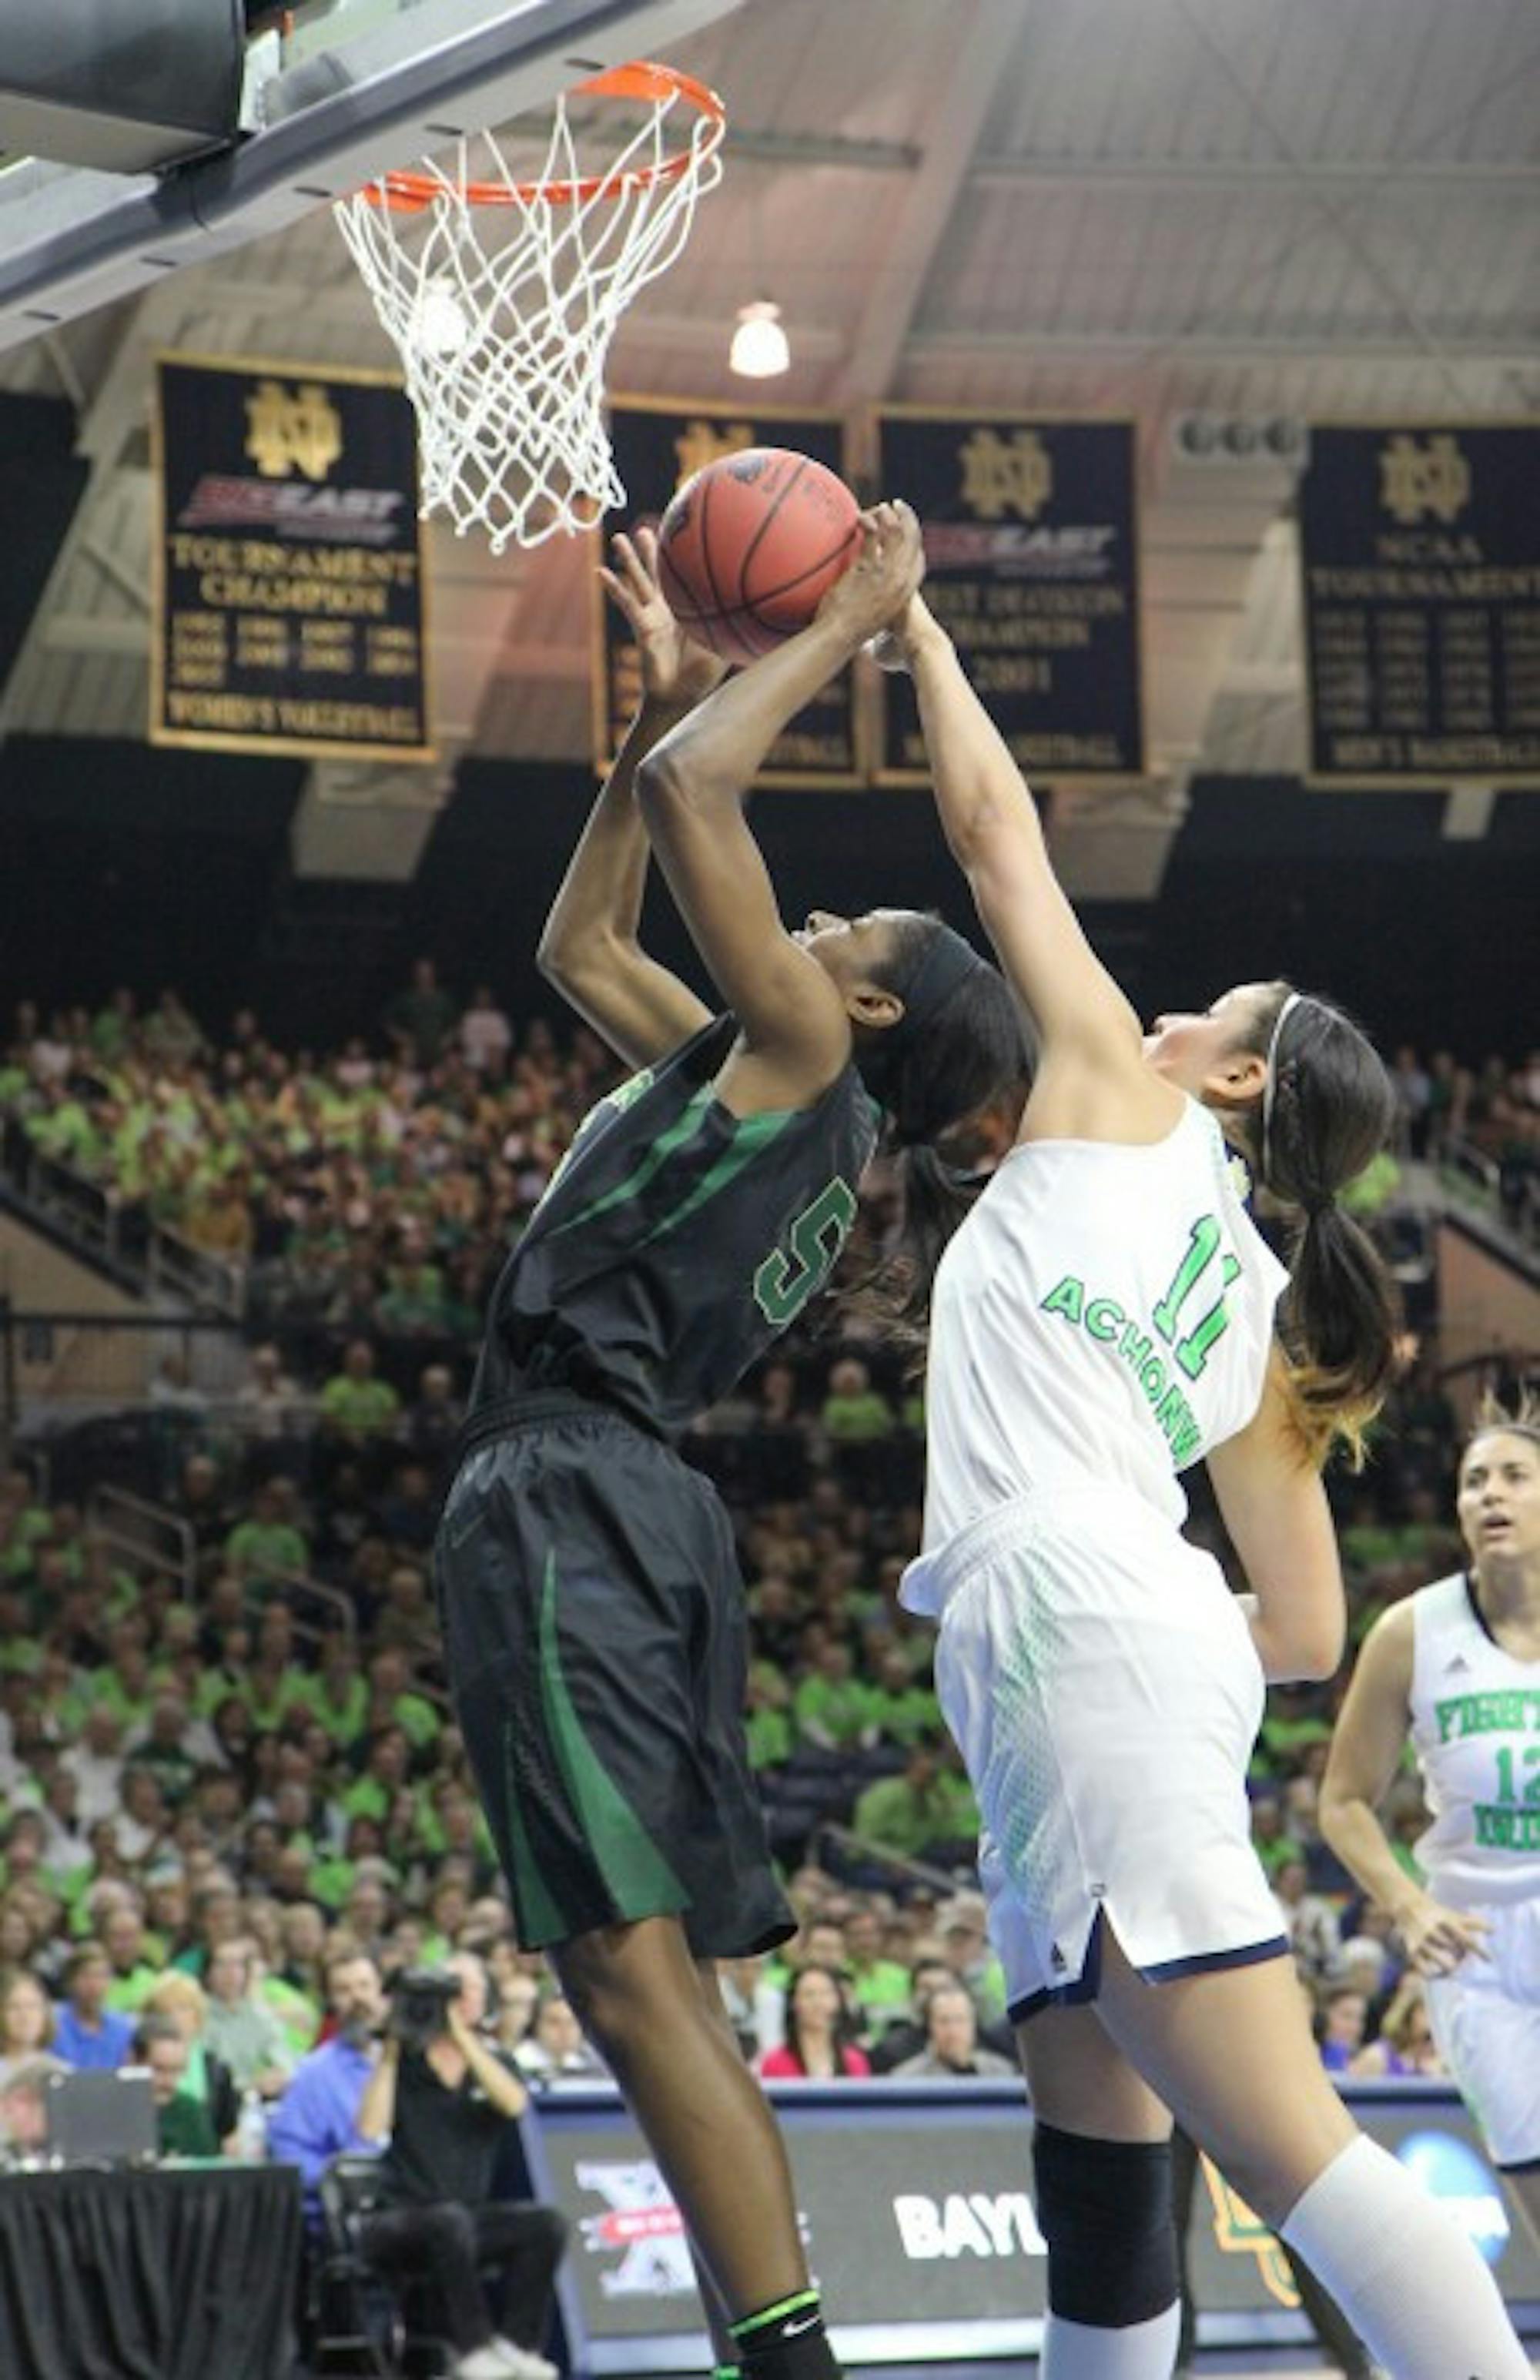 Former Irish forward Natalie Achonwa blocks a shot during Notre Dame’s 88-69 win over Baylor in the Elite Eight of the NCAA tournament on March 31, 2014.  Achonwa currently plays for the Indiana Fever.